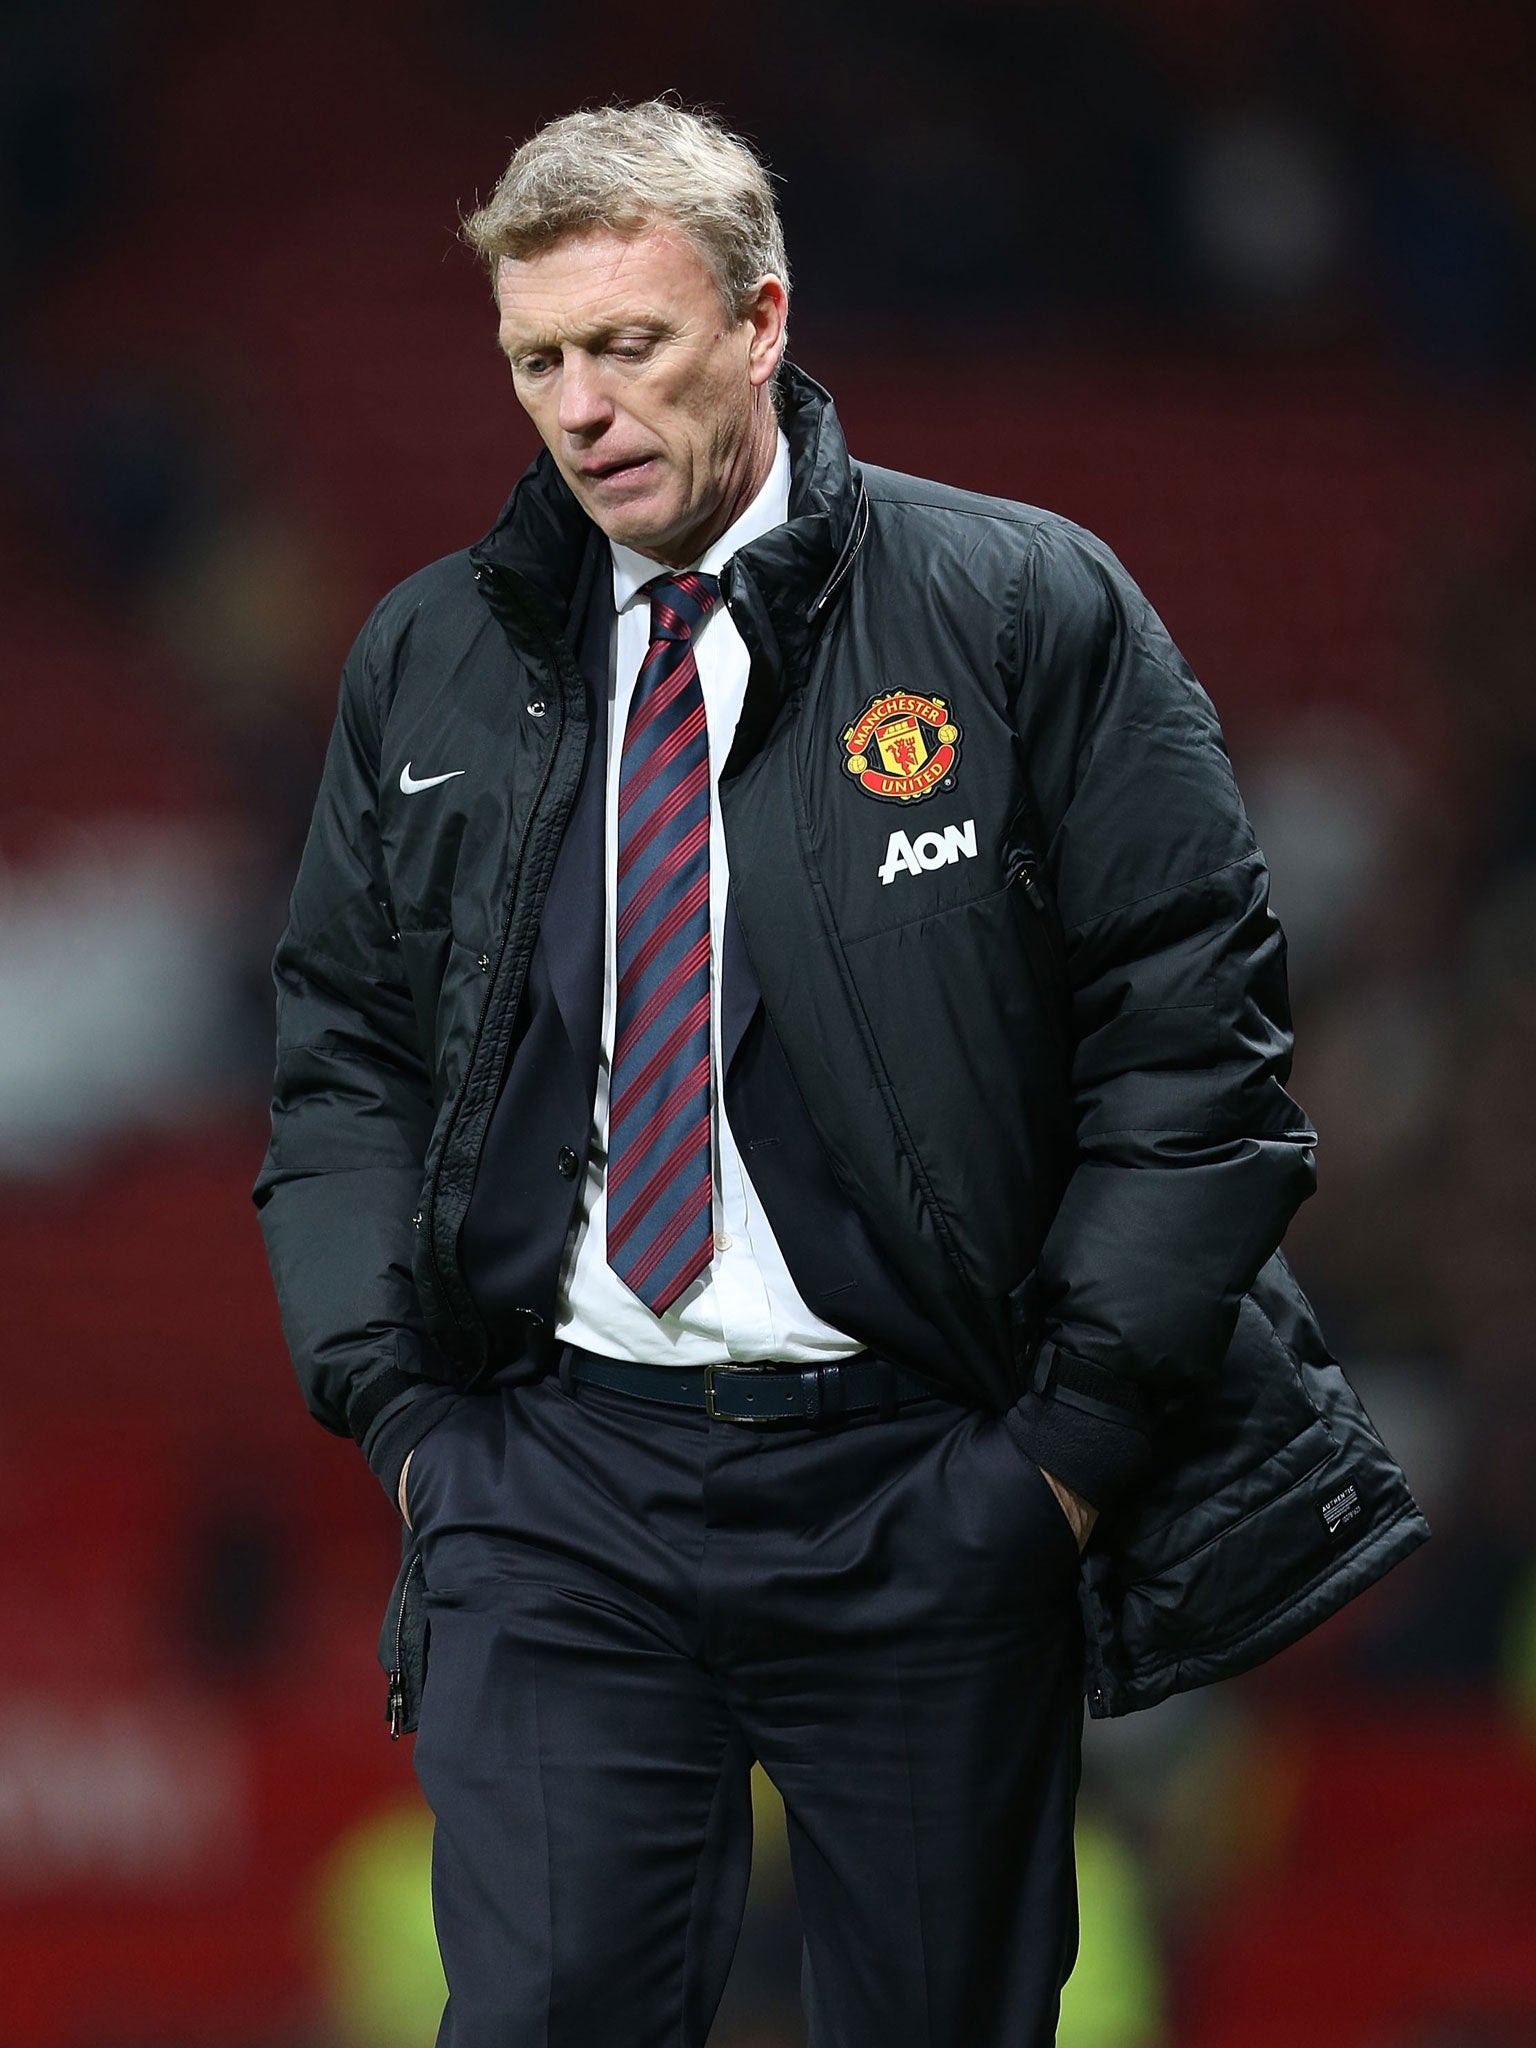 David Moyes experienced a new low with United when they lost to Everton at home